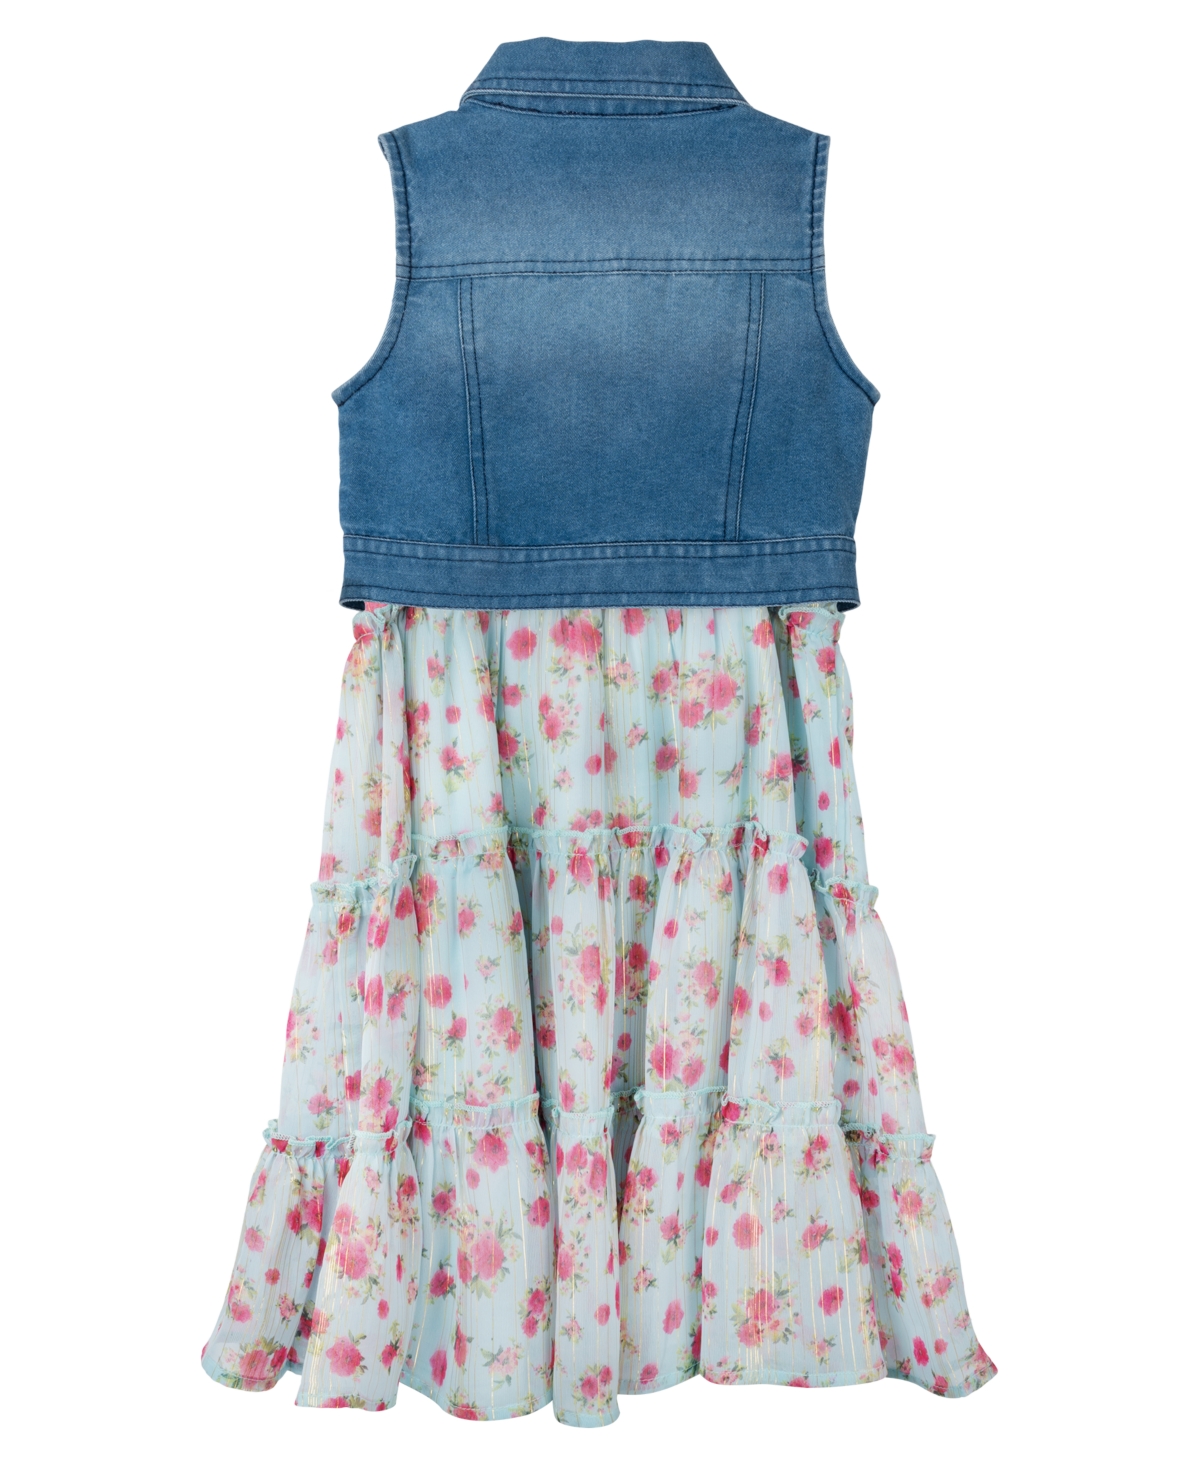 Shop Rare Editions Toddler & Little Girls Denim Vest Dress Outfit With Necklace, 3 Pc In Aqua